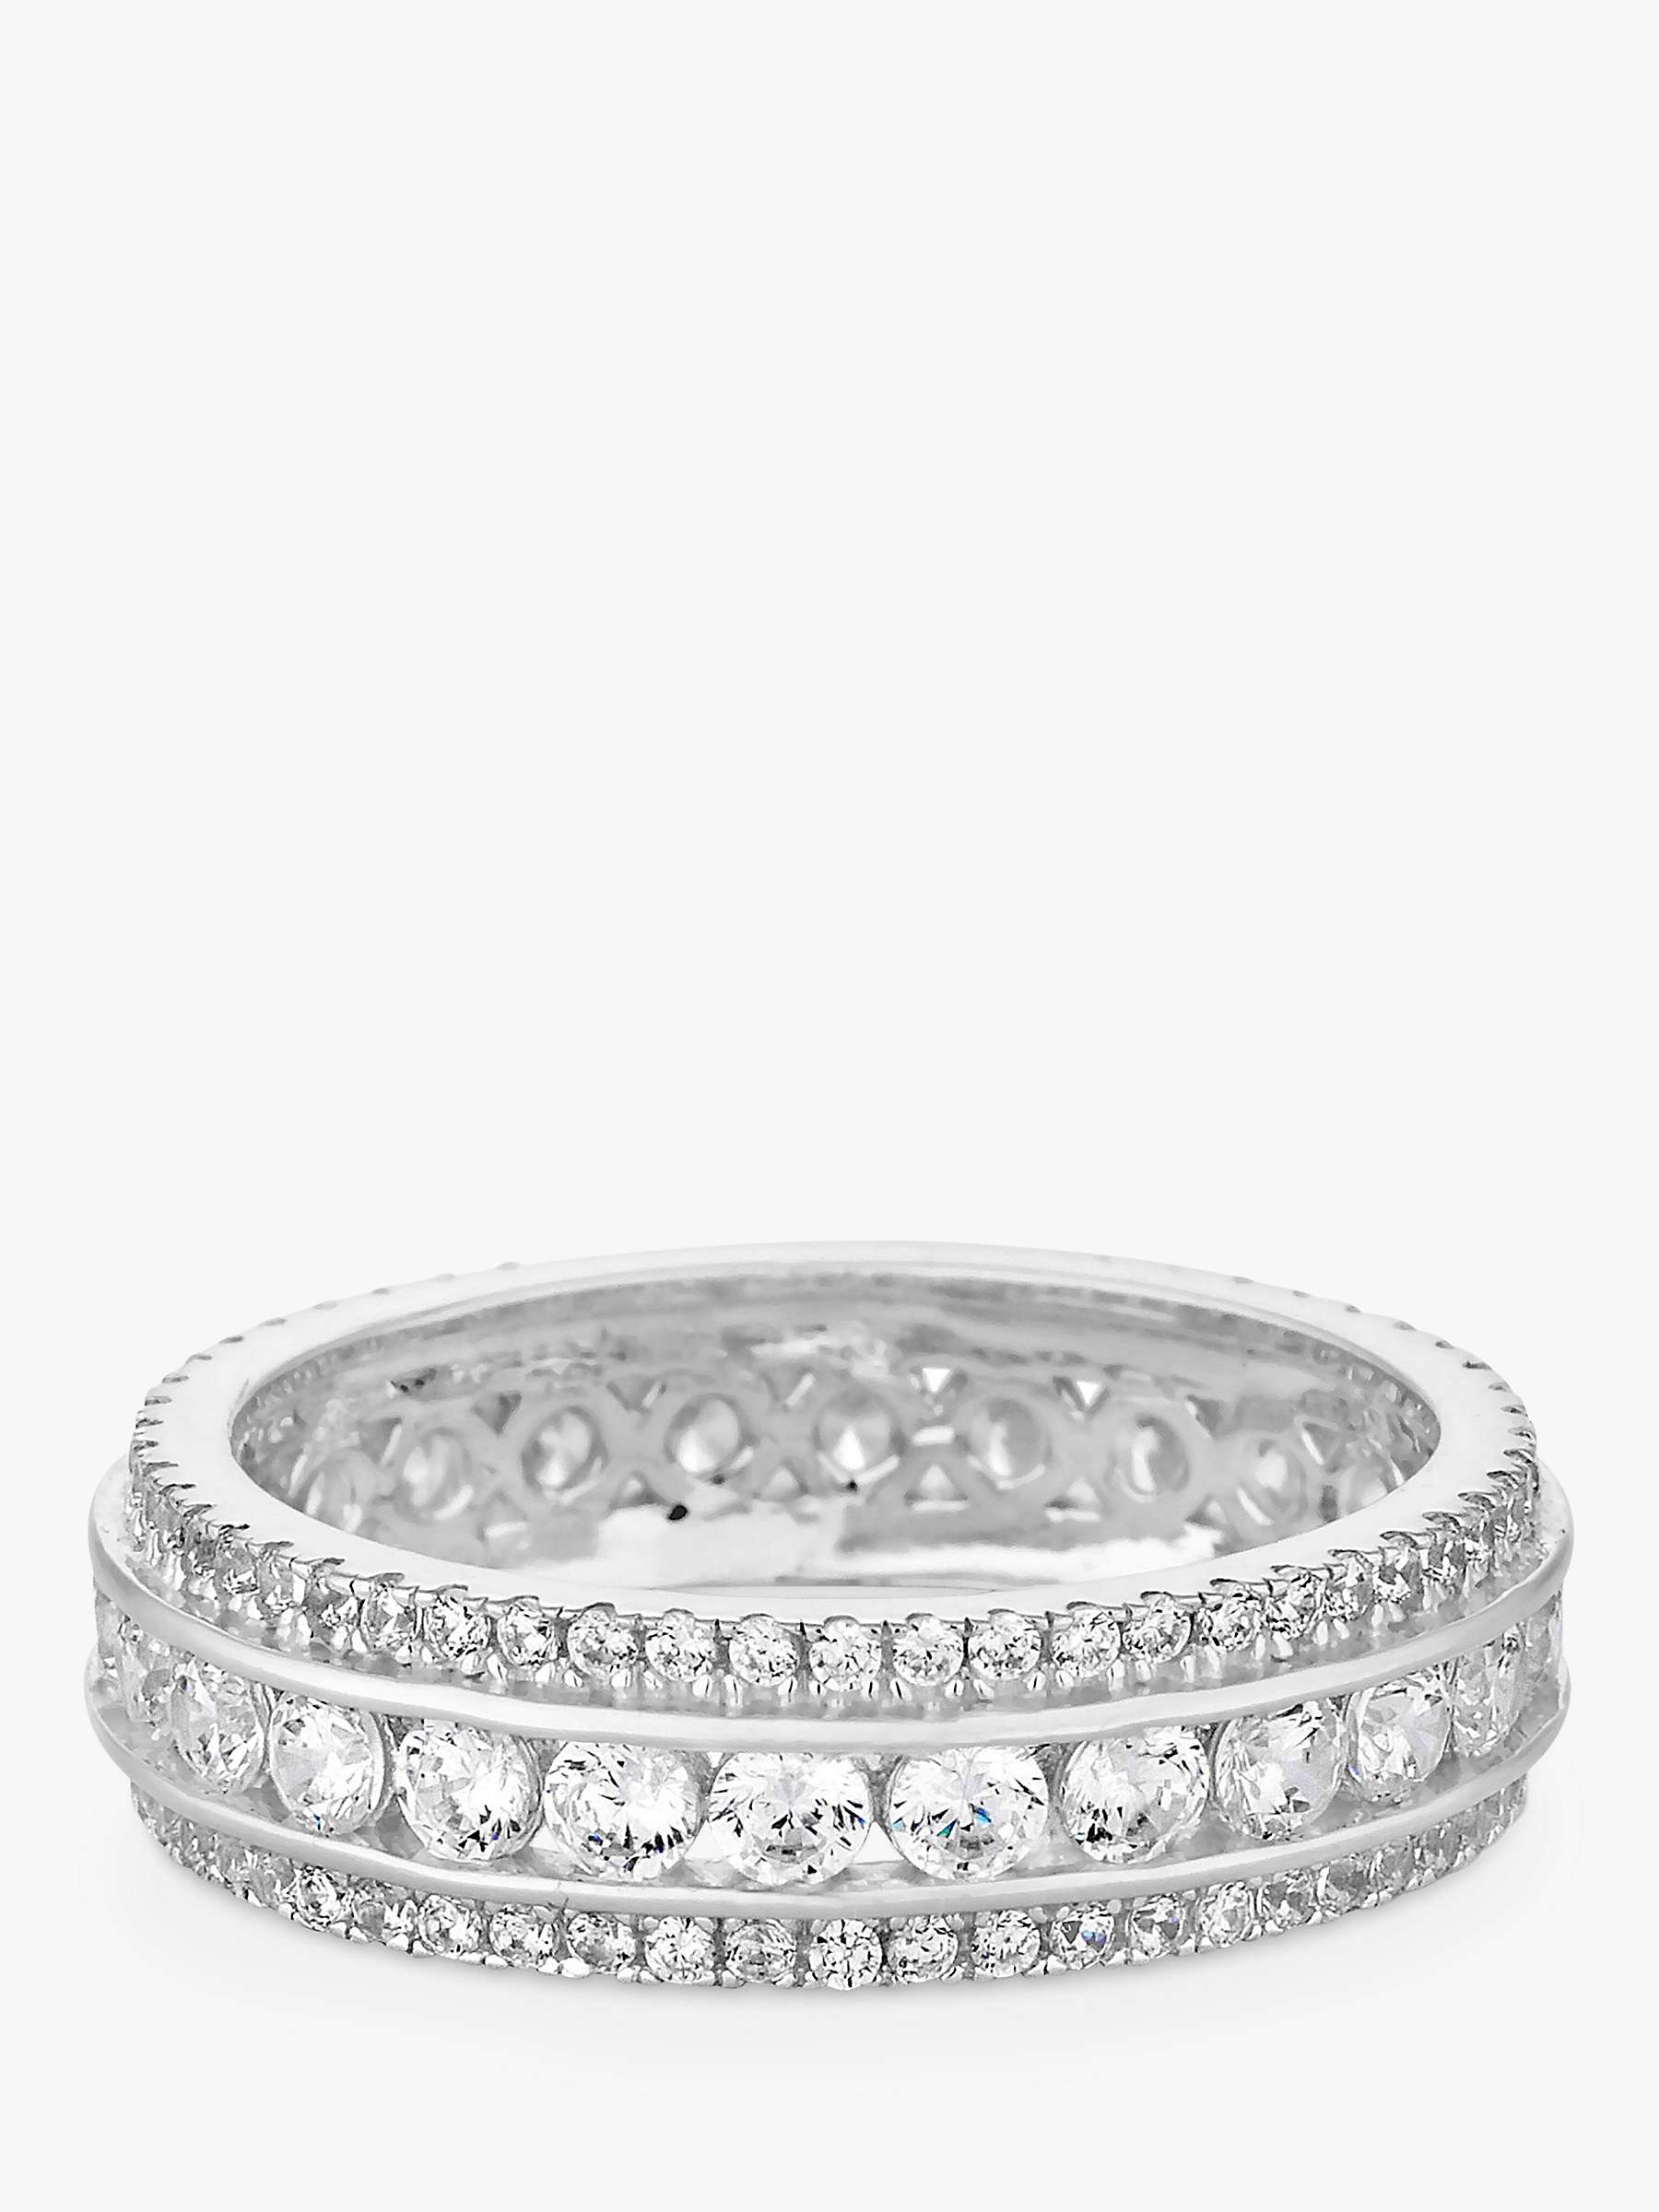 Buy Simply Silver Triple Row Cubic Zirconia Band Ring, Silver Online at johnlewis.com